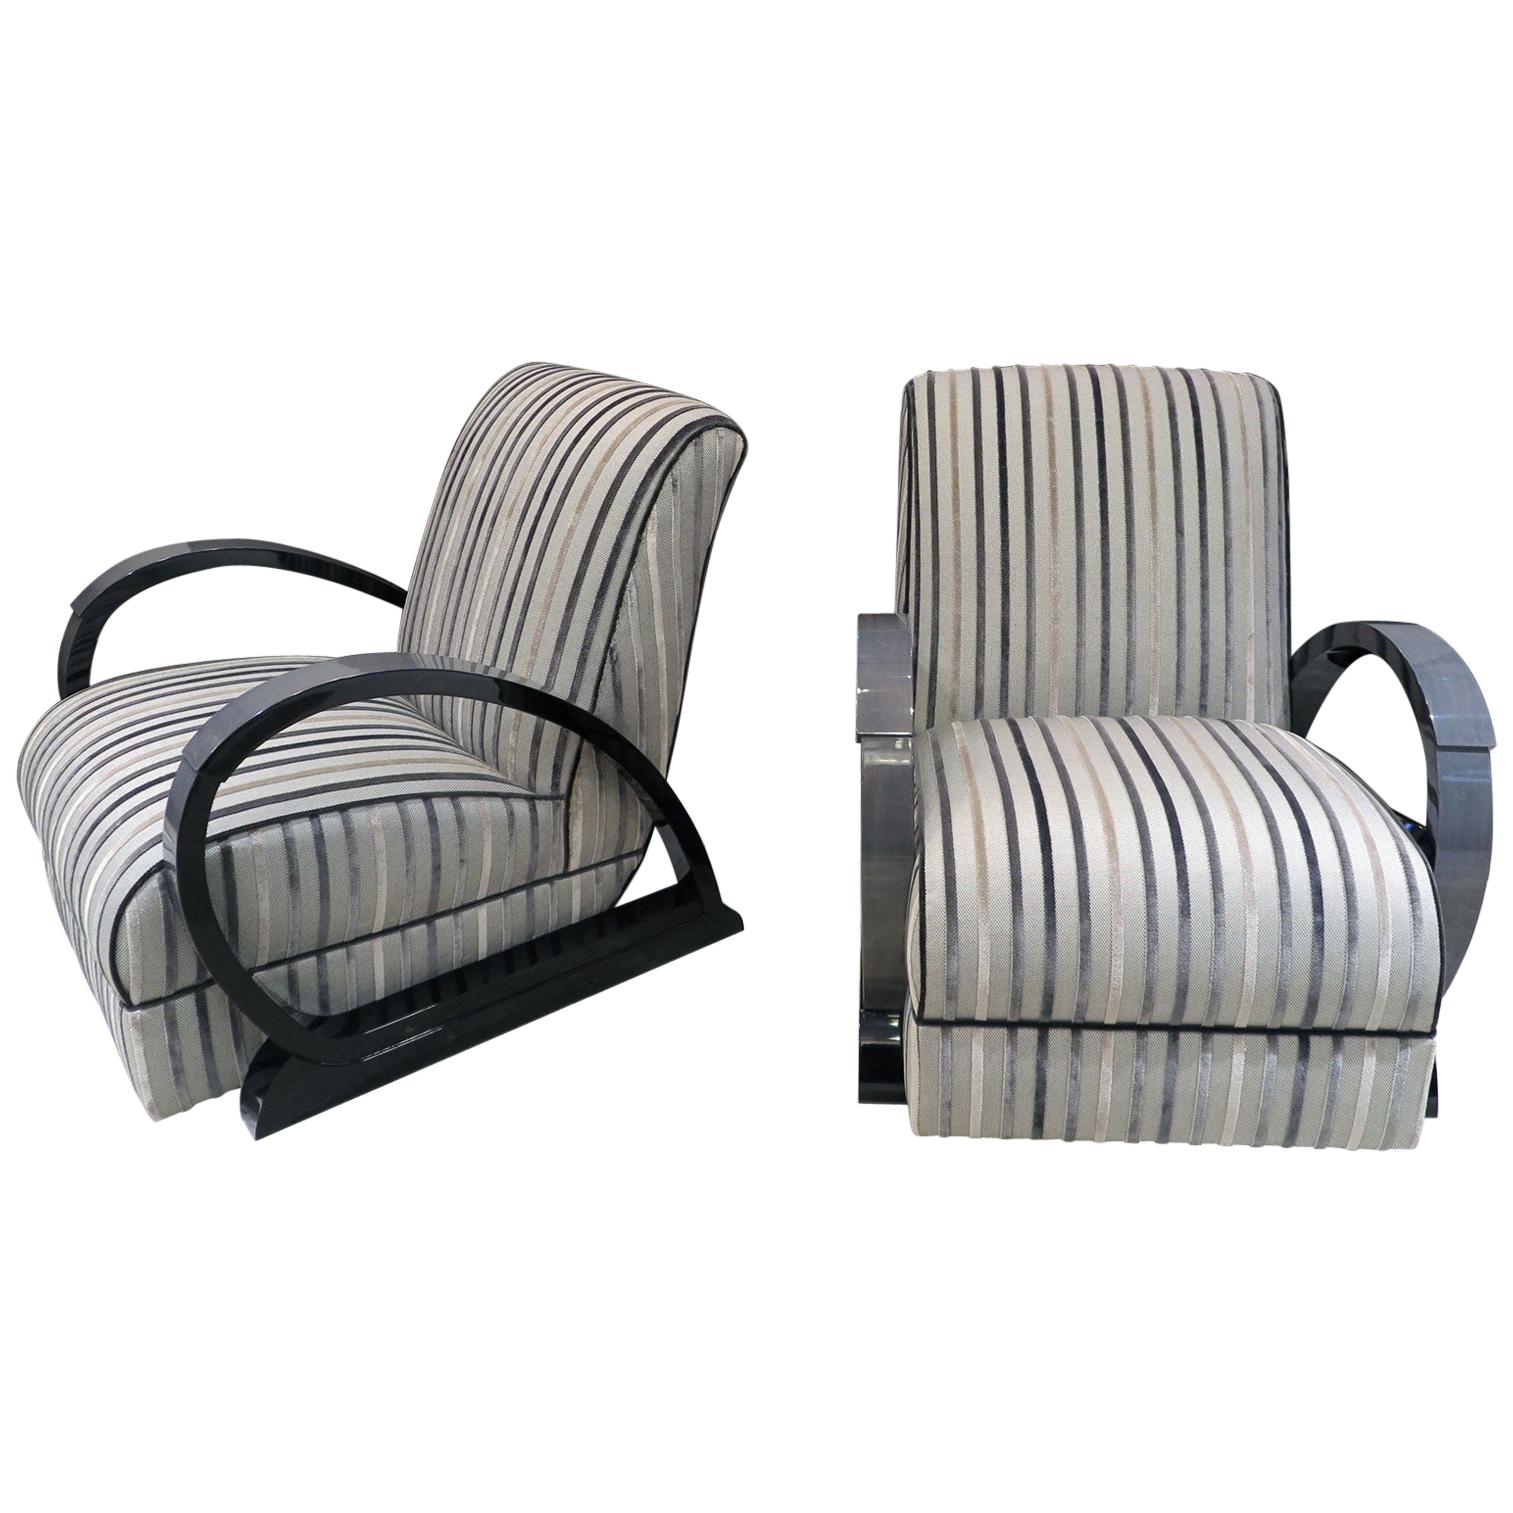 Pair of Art Deco Style Lounge Chairs in Grey Maple with Black Lacquer